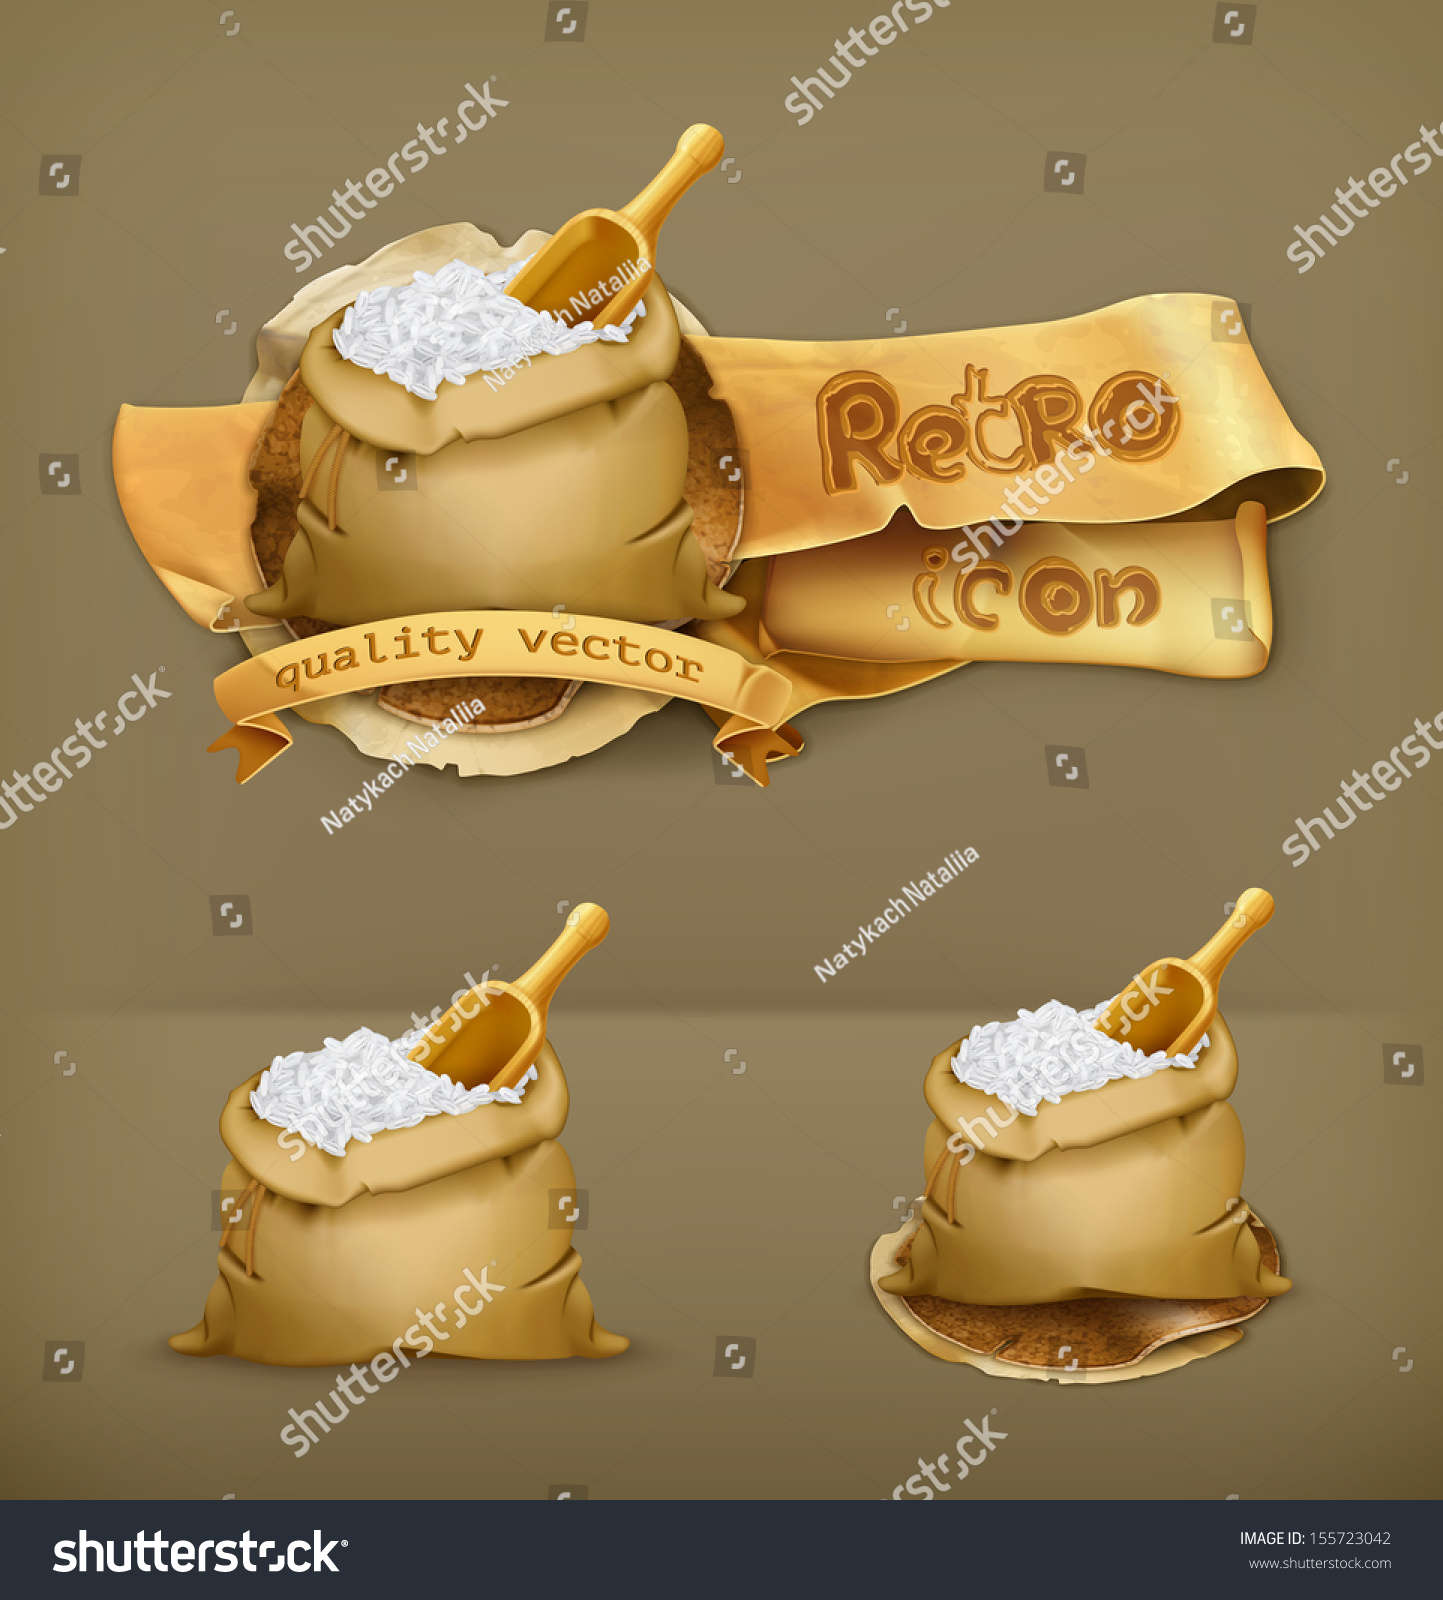 Bag Of Rice, Vector Icon - 155723042 : Shutterstock